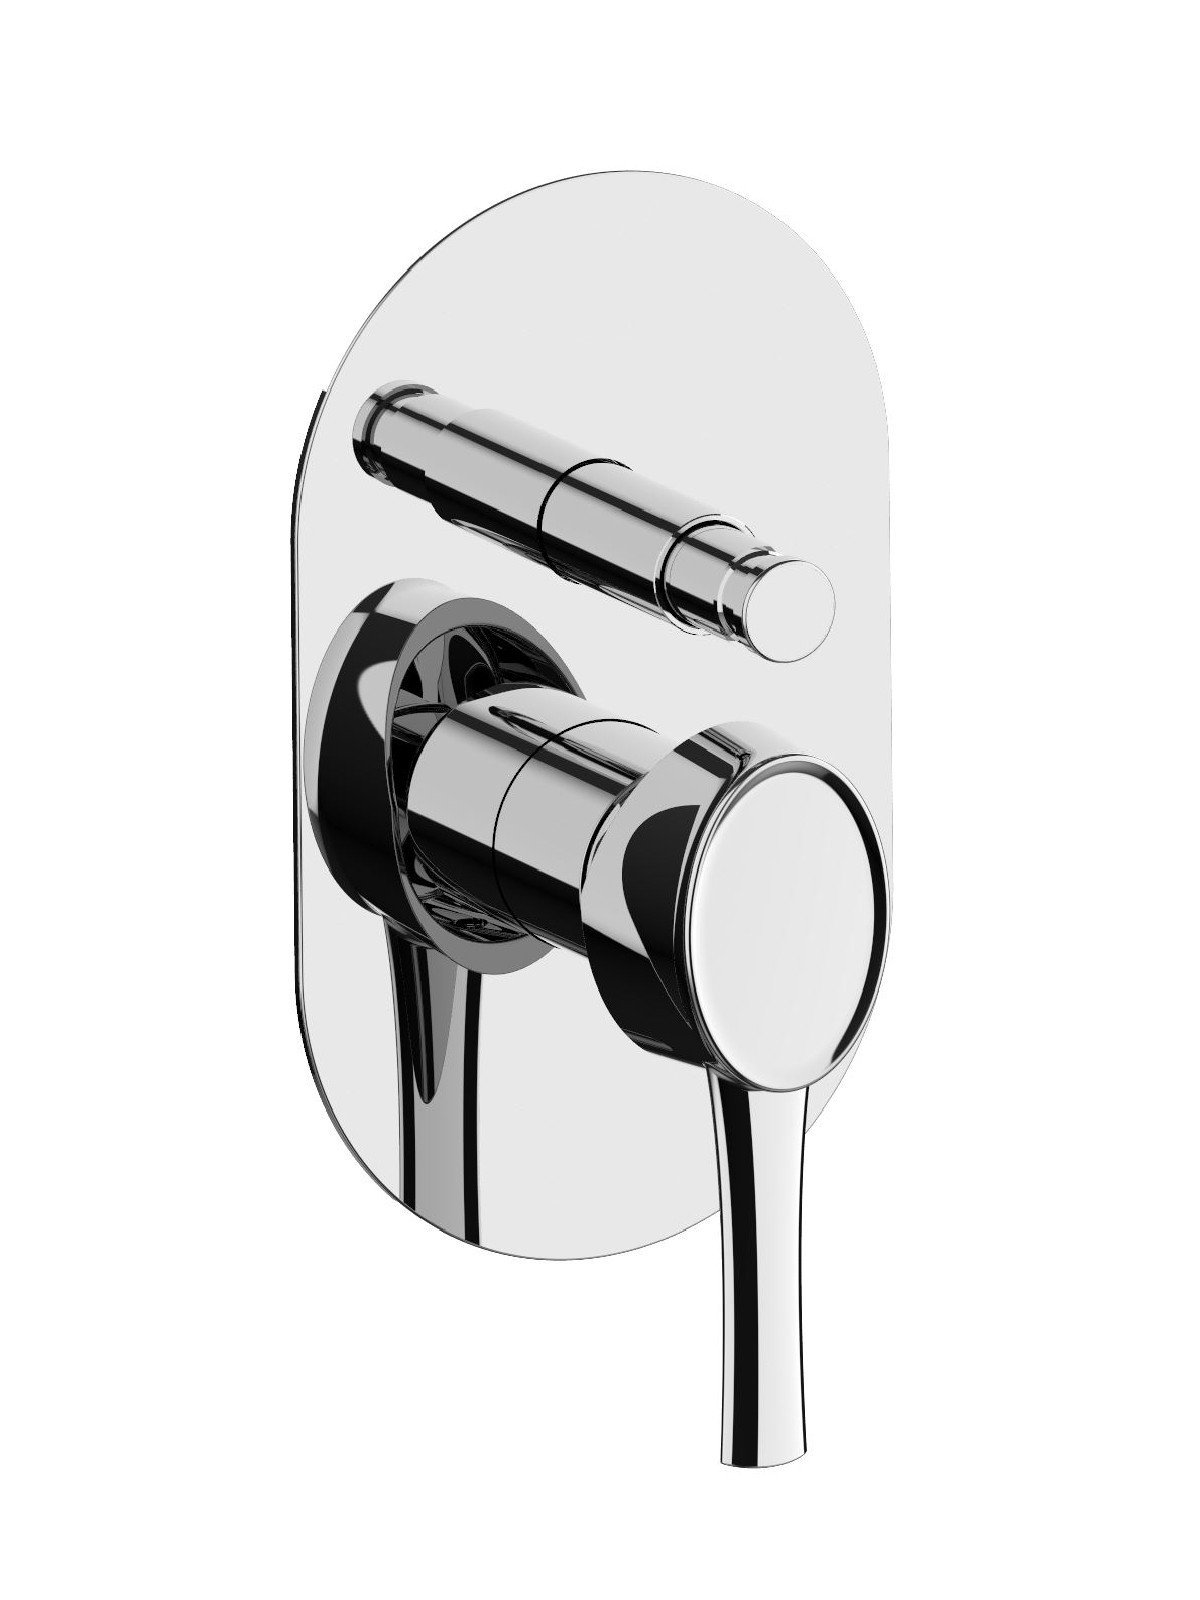 Complete built-in single-lever mixer with automatic diverter